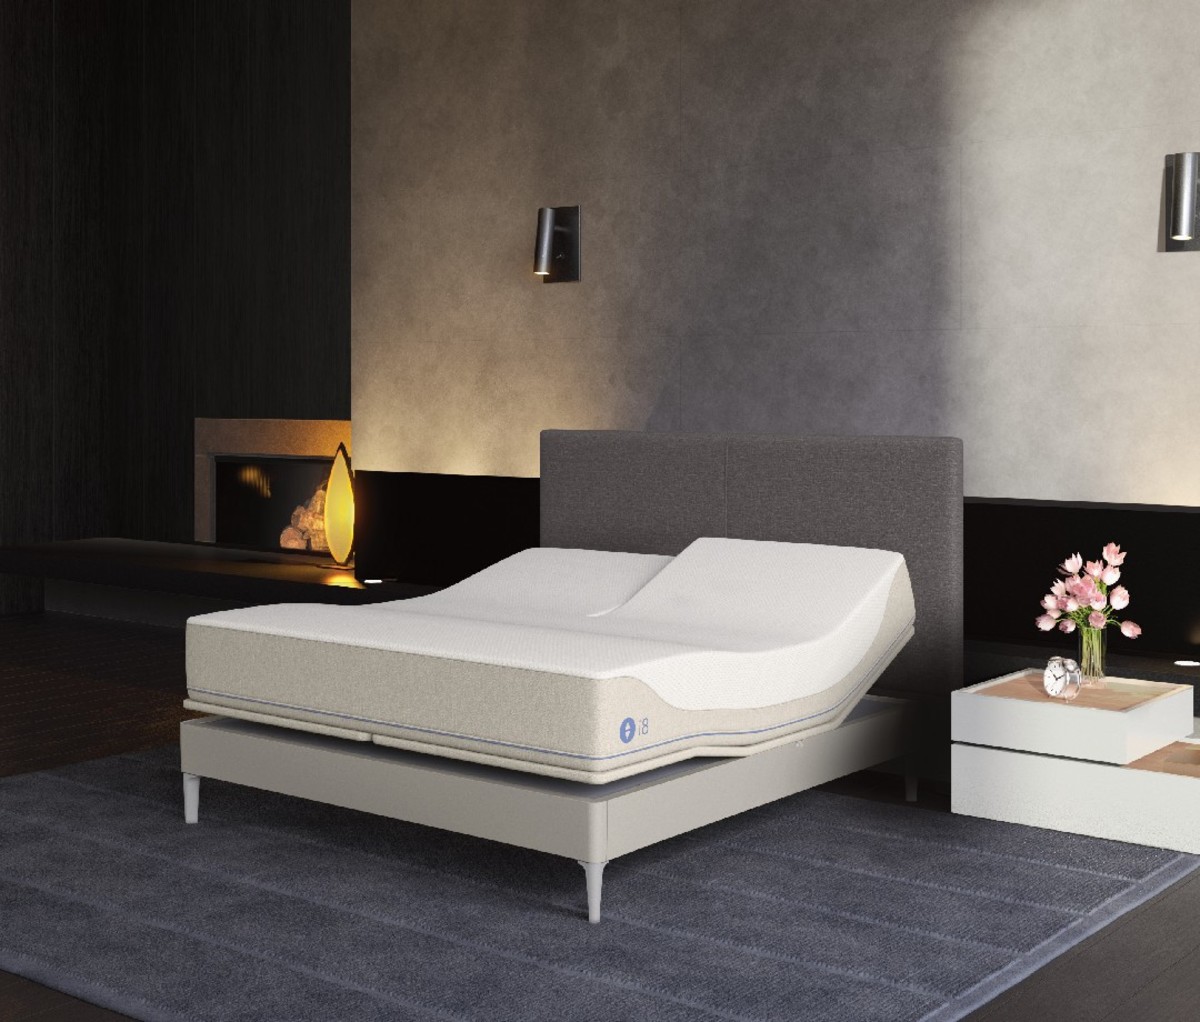 An image of a Sleep Number 360 i8 Smart Bed in a bedroom.